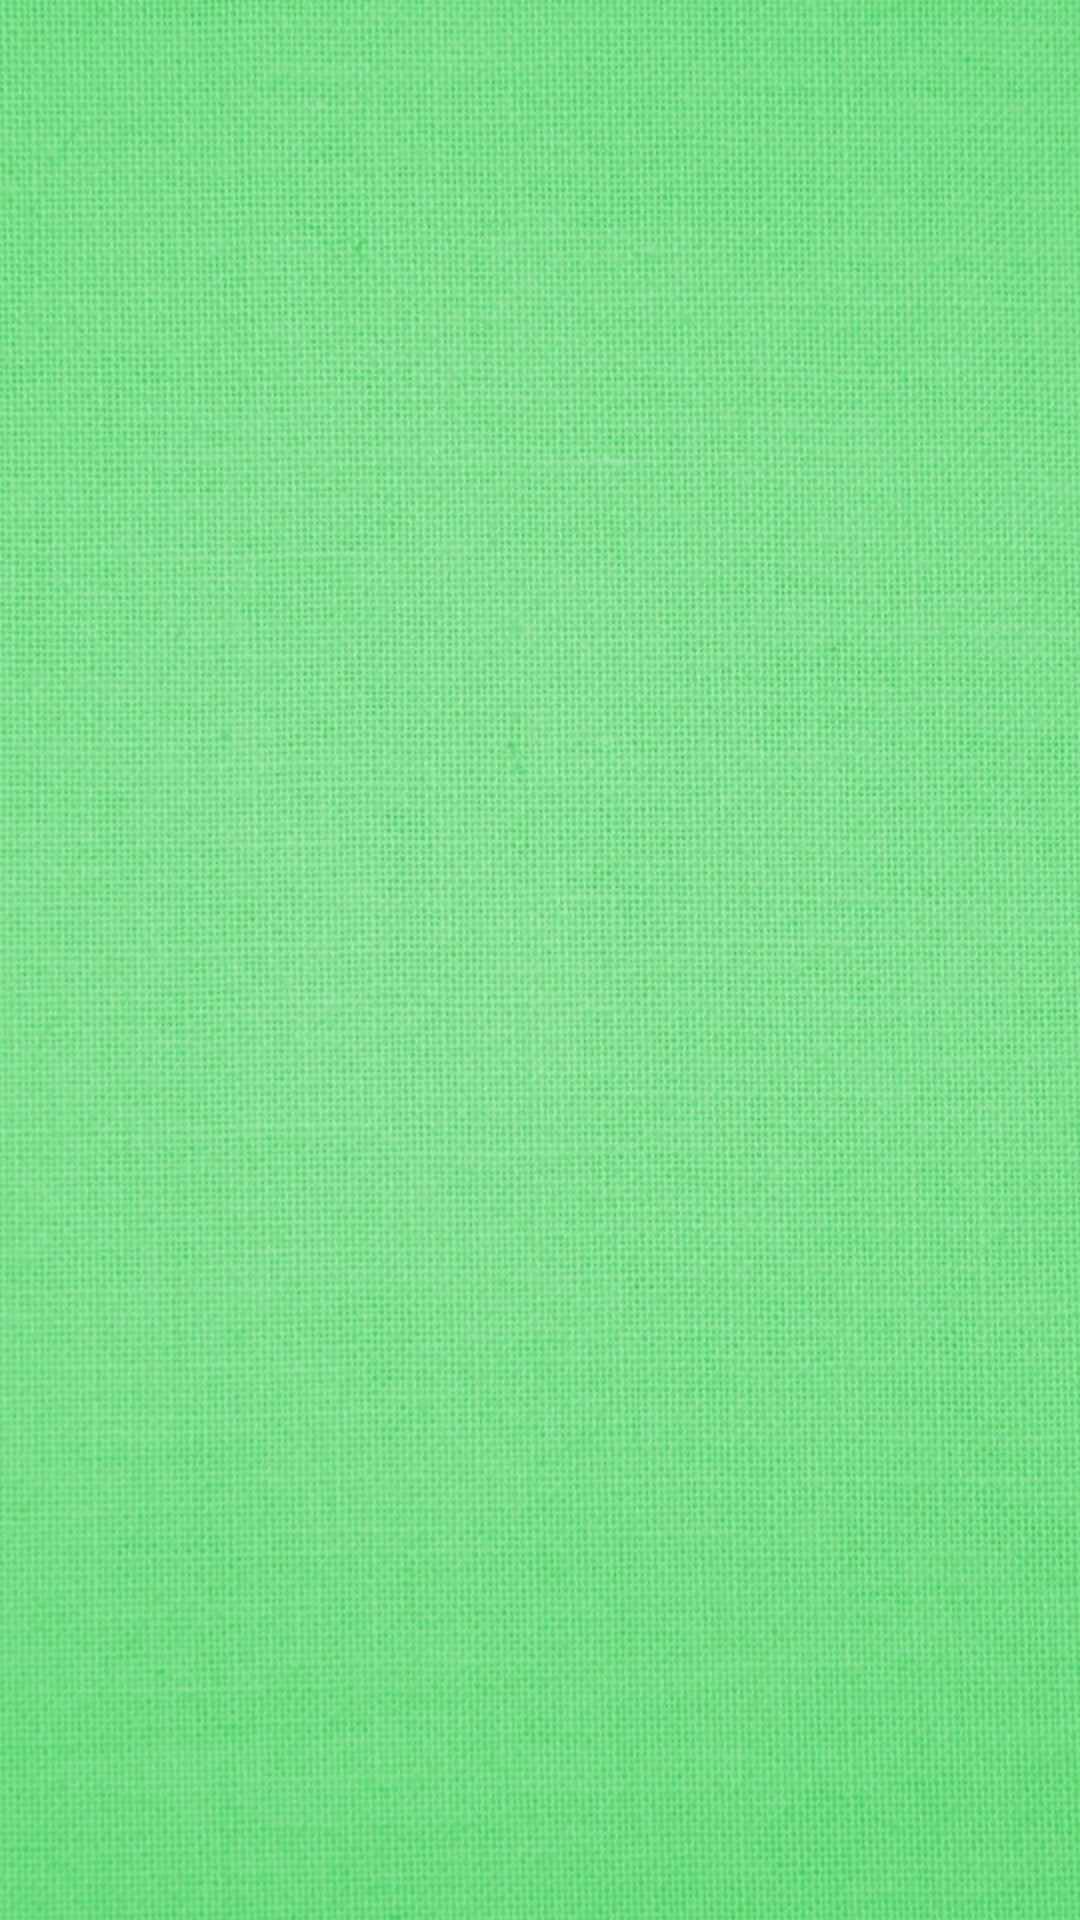 Mint Green iPhone 7 Wallpaper with resolution 1080X1920 pixel. You can use this wallpaper as background for your desktop Computer Screensavers, Android or iPhone smartphones